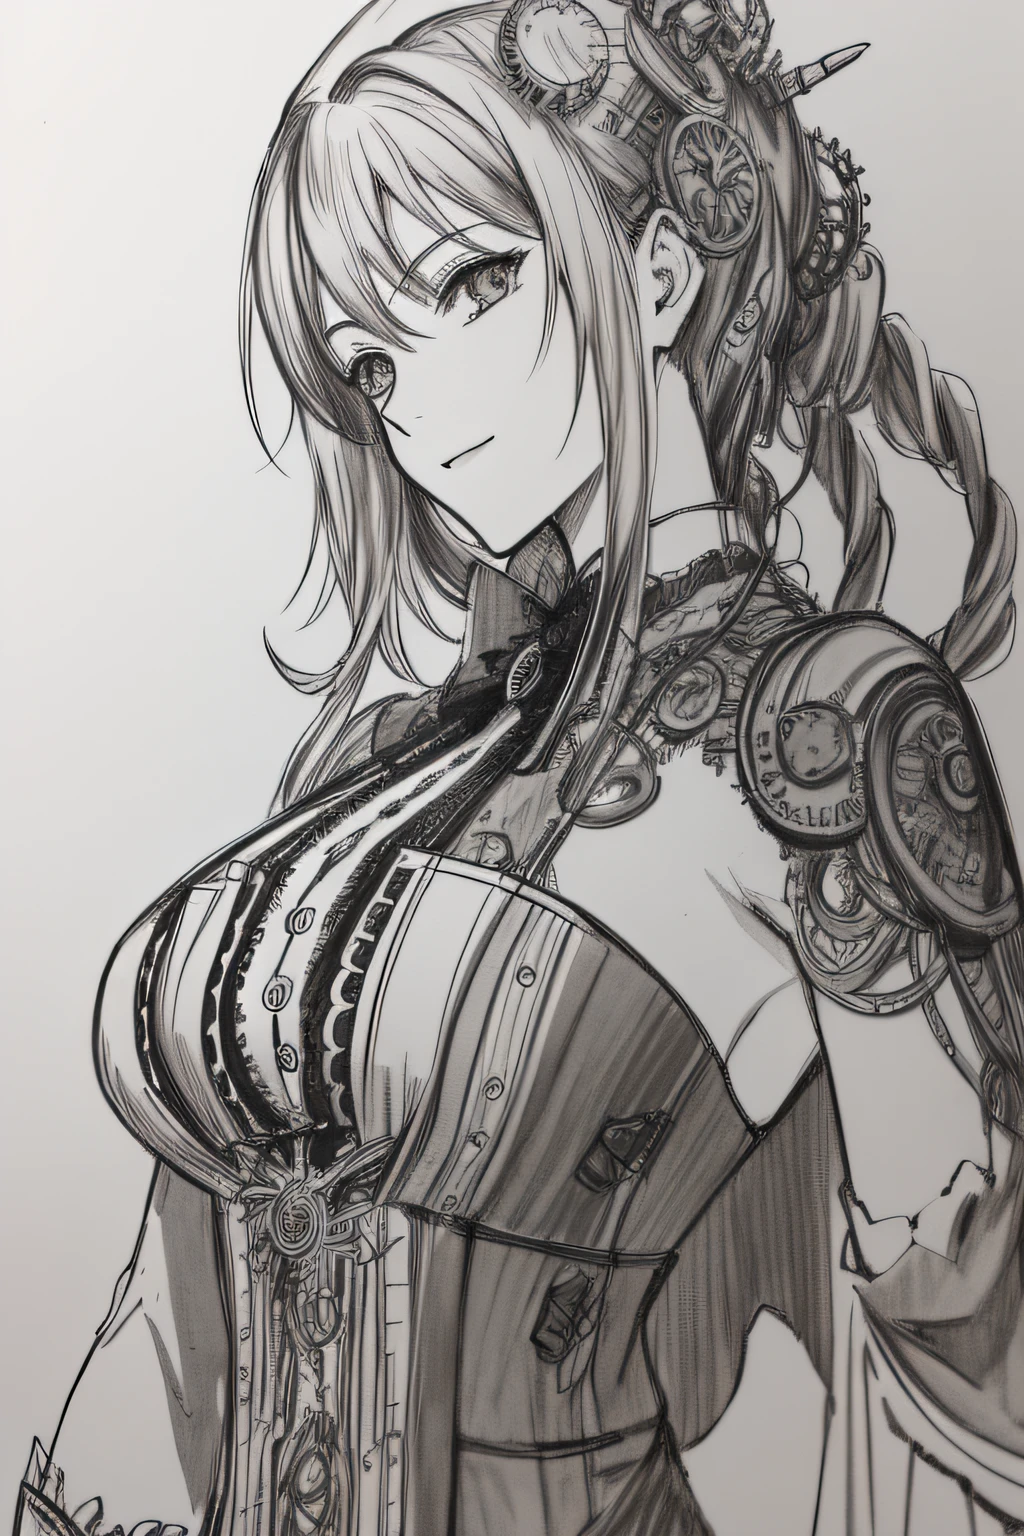 An awe-inspiring greyscale pencil sketch capturing the enigmatic Makima from the manga series Chainsaw Man, showcasing her in a detailed portrait that extends till her torso. Makima is portrayed wearing an exquisite steampunk dress, intricately adorned with gears, chains, and ornate patterns. The sketch showcases the stunning details of her dress, the folds and textures, as well as the precise shading that brings depth to her form. The sketch is rendered in 4K HDR, allowing for impressive visual clarity and contrast. The background is kept minimal, drawing attention to Makima's striking presence and captivating steampunk aesthetics. Style: Detailed pencil sketch with meticulous attention to linework, shading, and texture, capturing the essence of Makima's steampunk dress. Execution: Created using high-quality pencils on fine-grained paper, employing various shading techniques to achieve lifelike depth and intricacy. --ar 1:1 --v